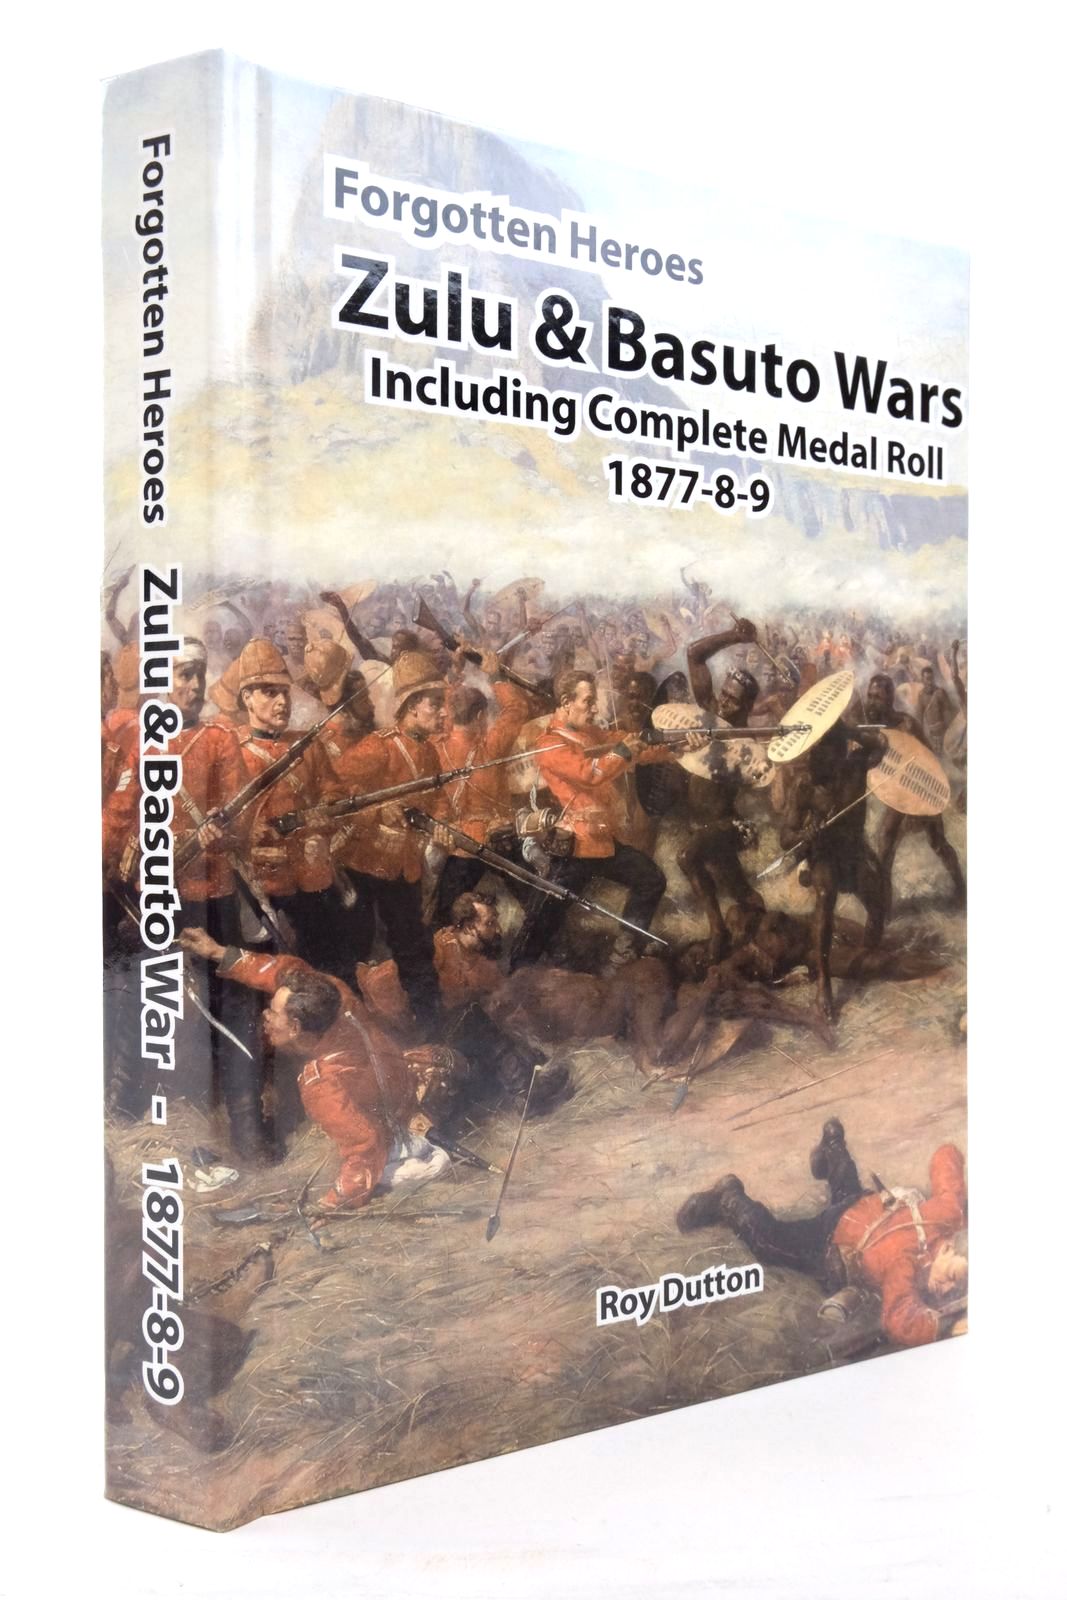 Photo of FORGOTTEN HEROES: ZULU & BASUTO WARS INCLUDING COMPLETE MEDAL ROLL 1877-8-9- Stock Number: 2138377